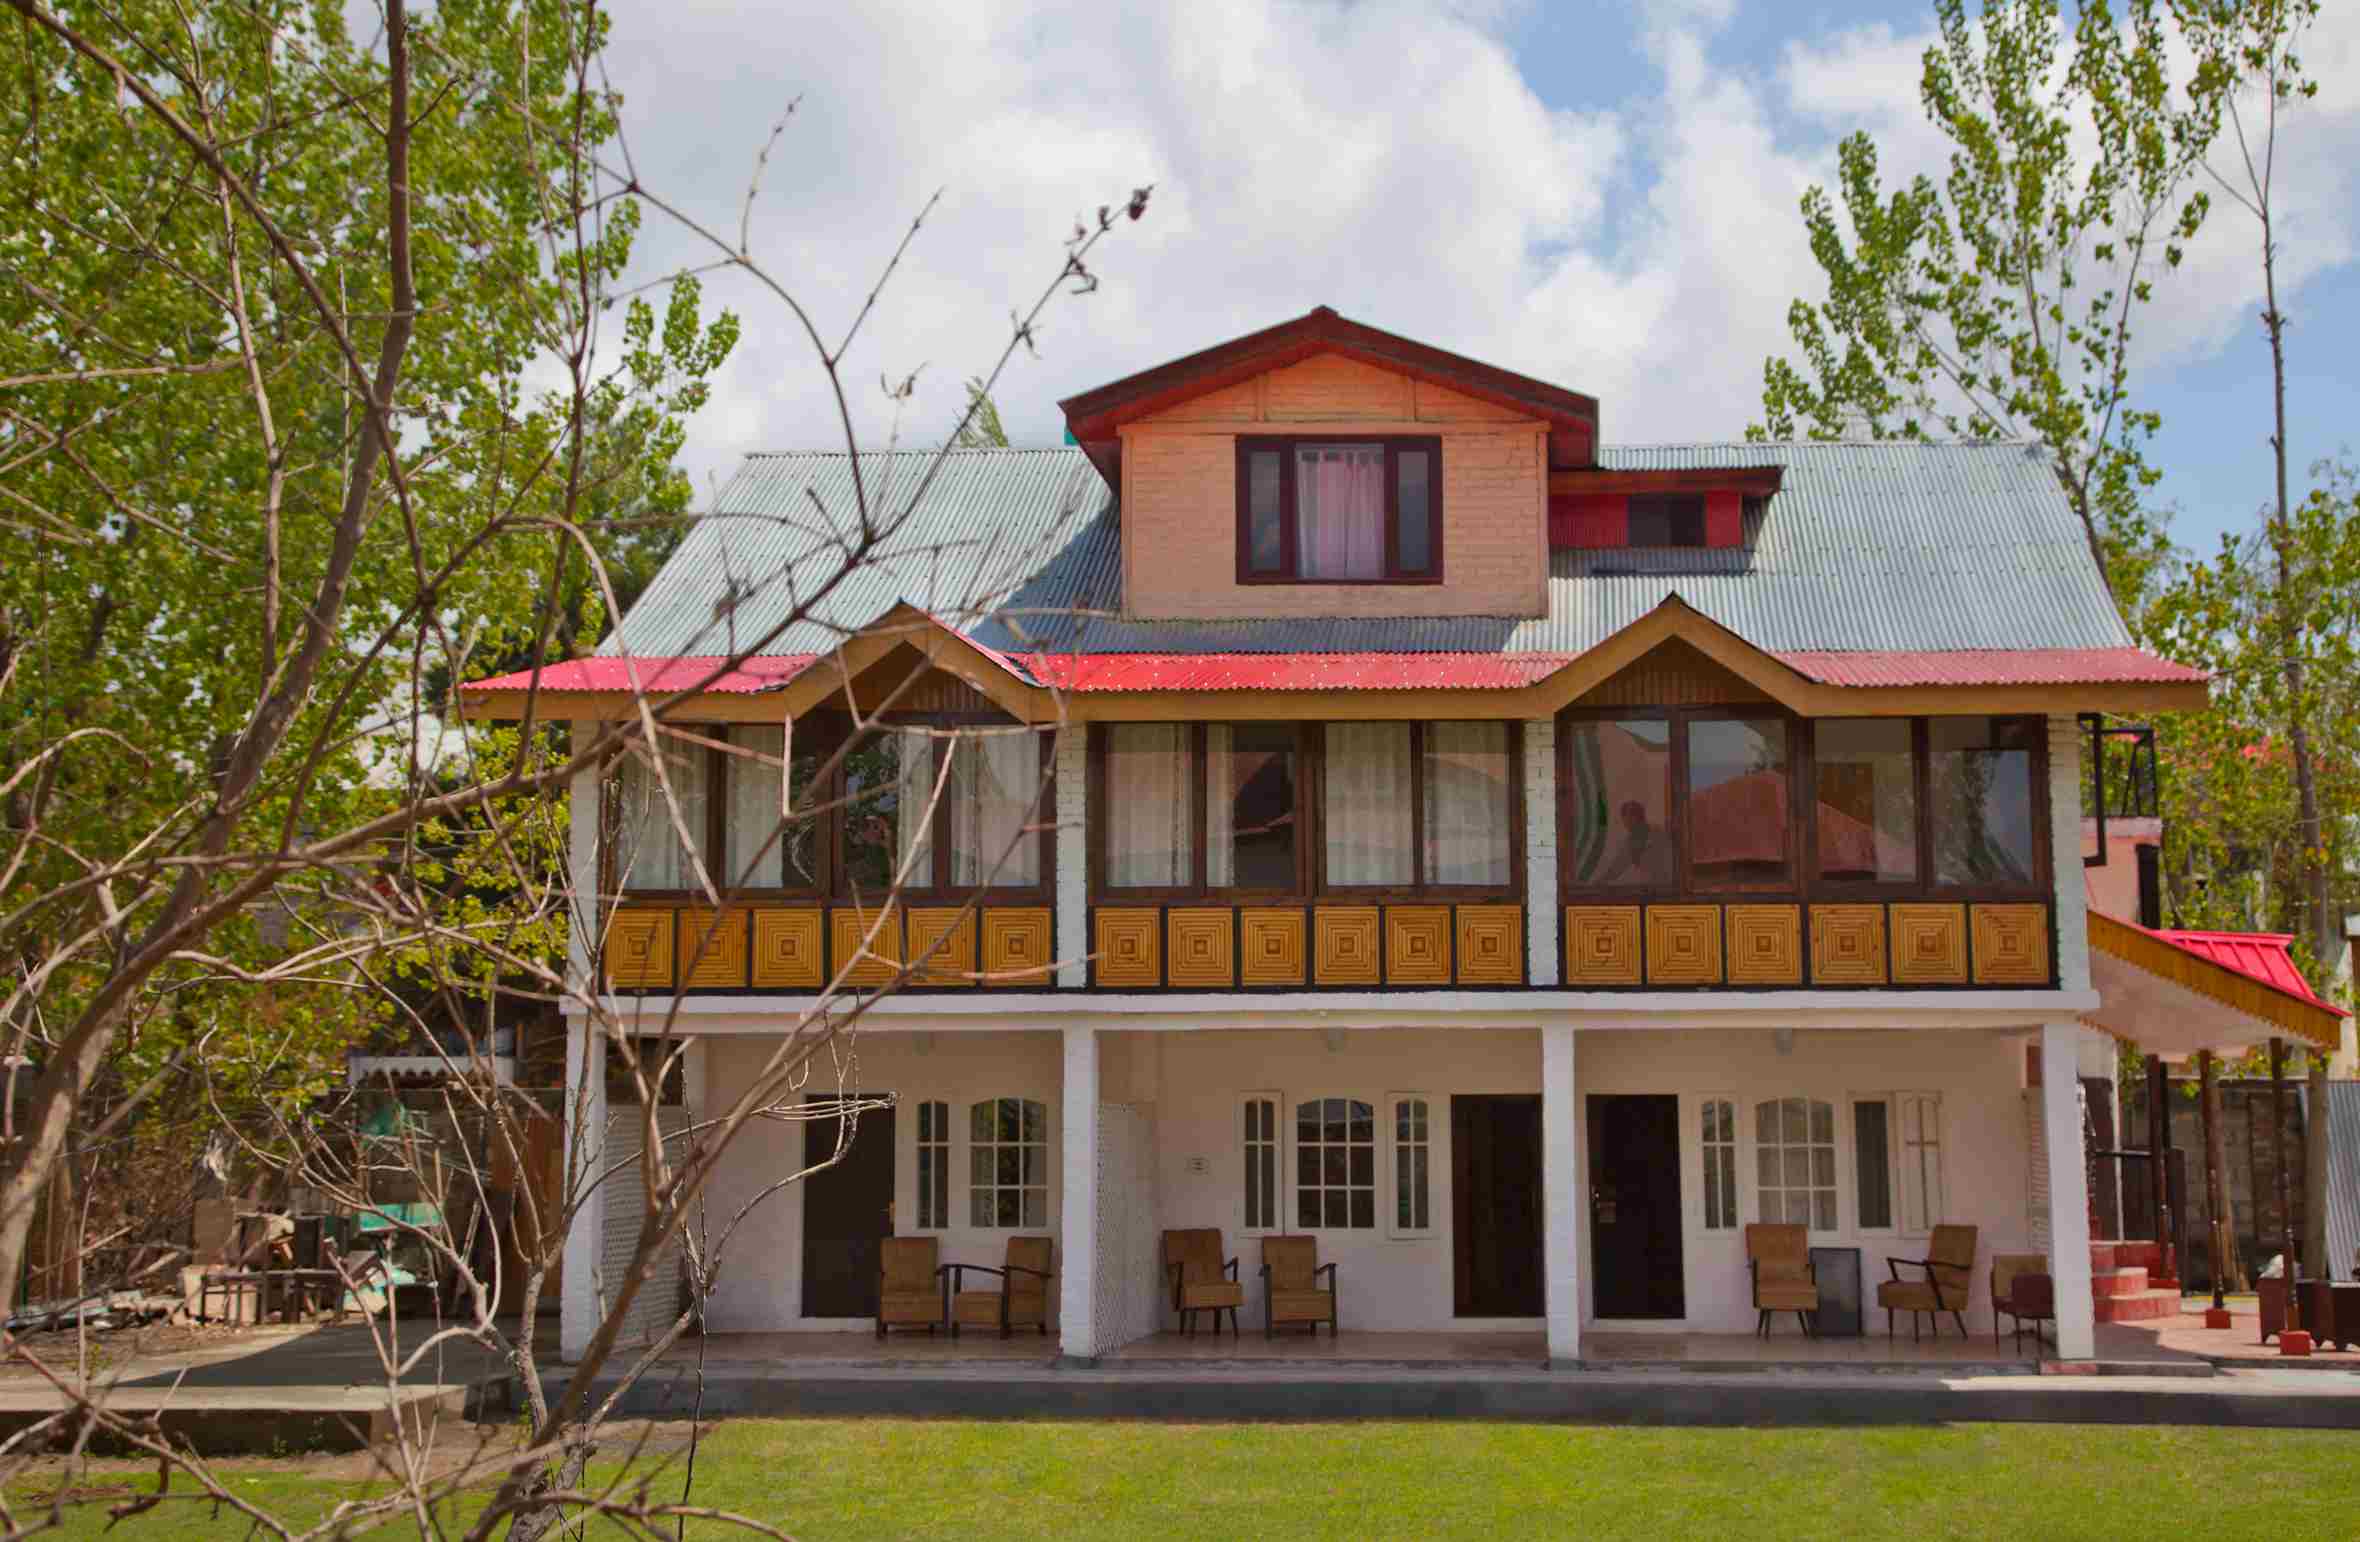 The Mahatta Homestay is a beautiful getaway in Srinagar that lets you immerse yourself in nature